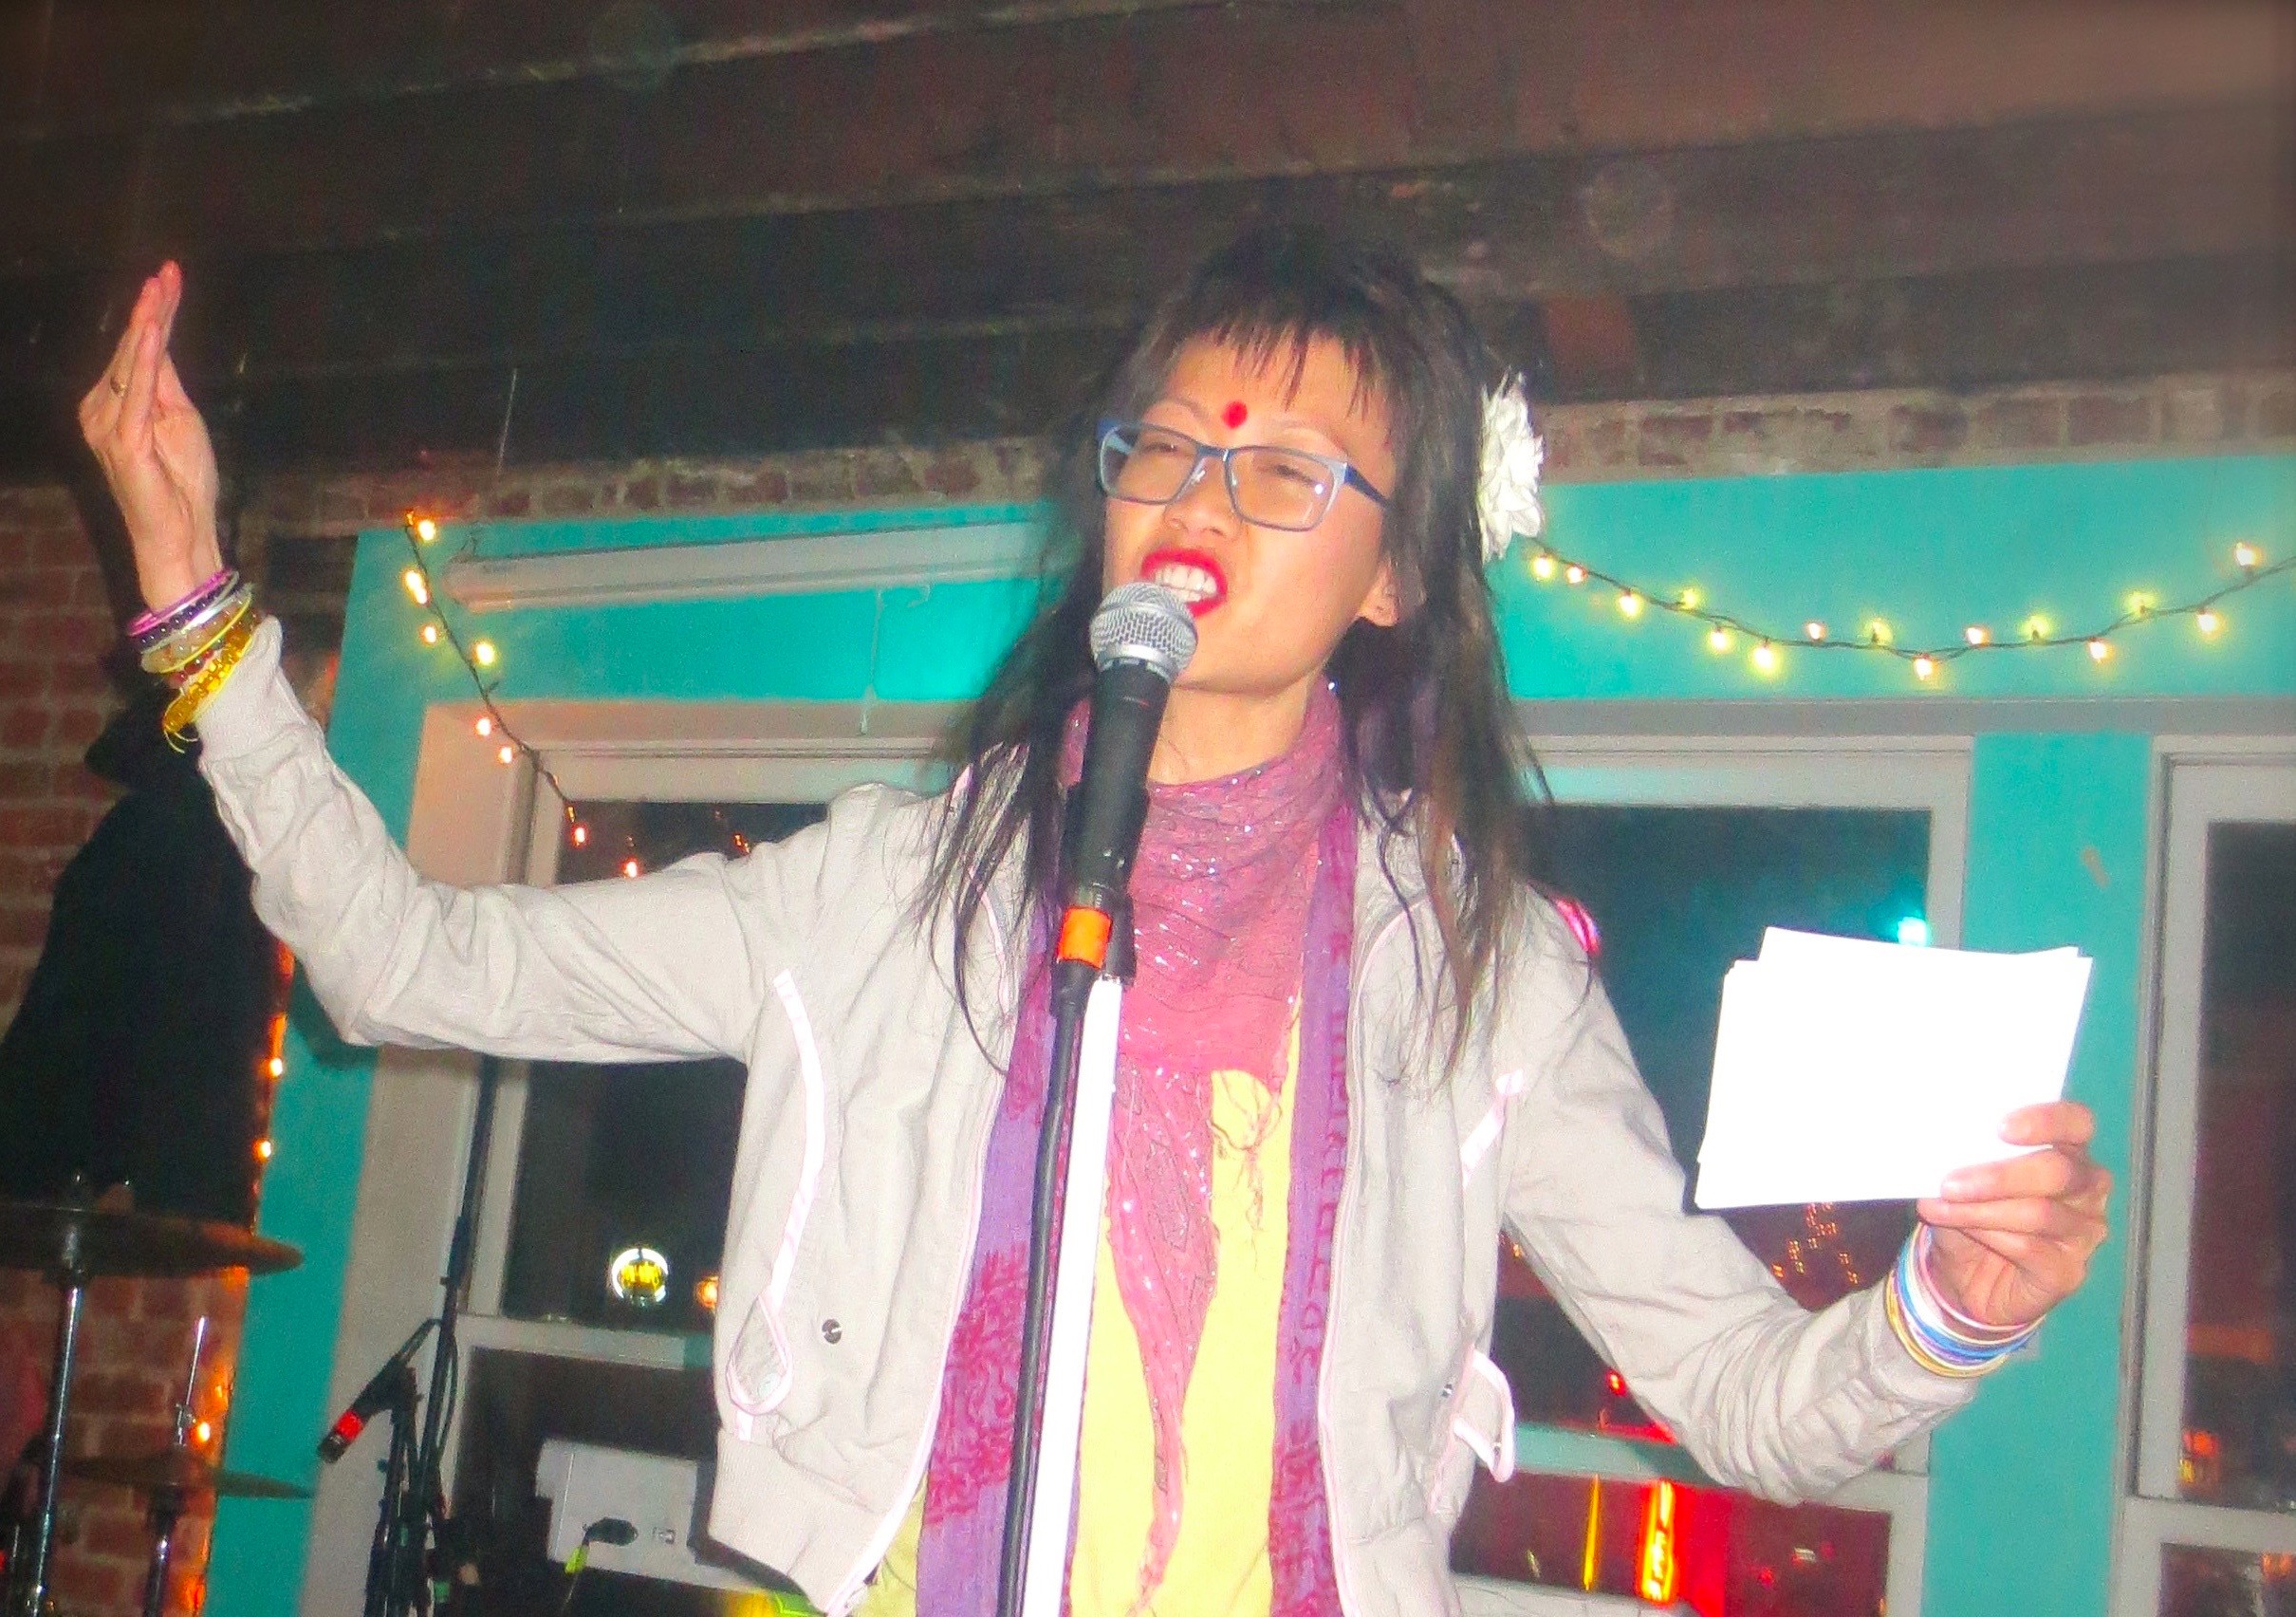 Poetry Reading on Open Mic Night